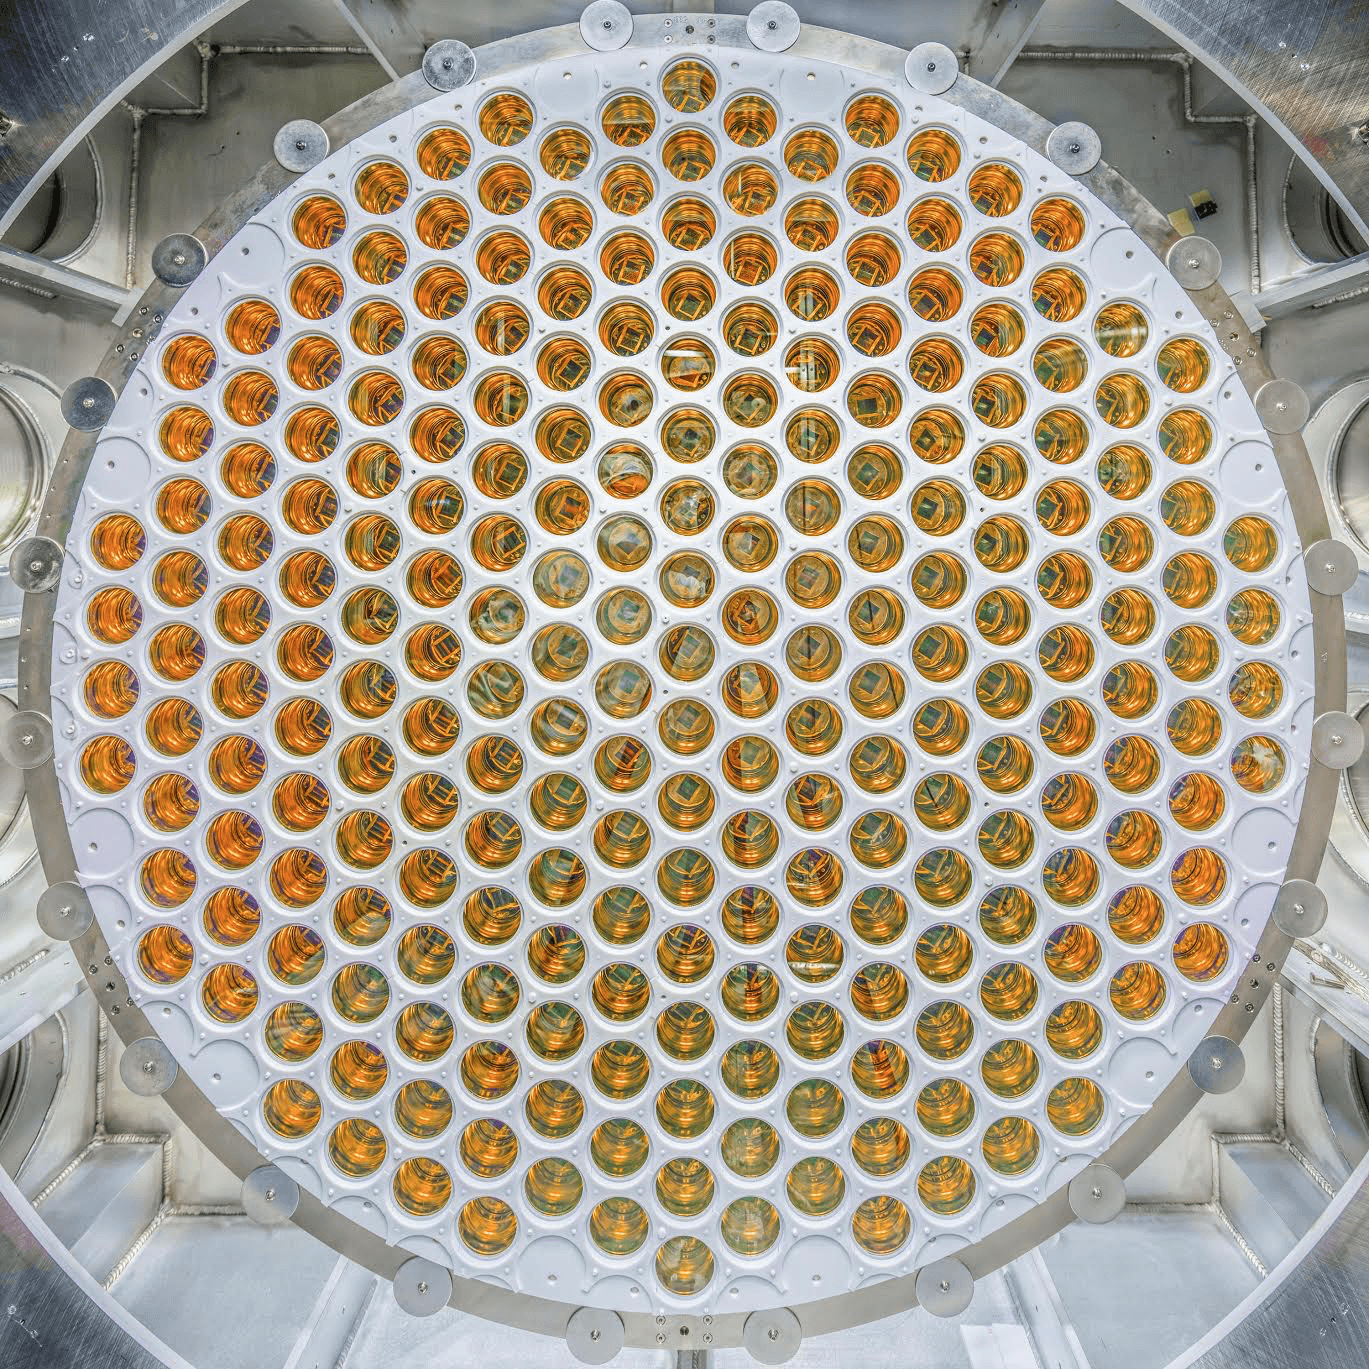 The bottom LZ PMT array with 241 photomultiplier tubes